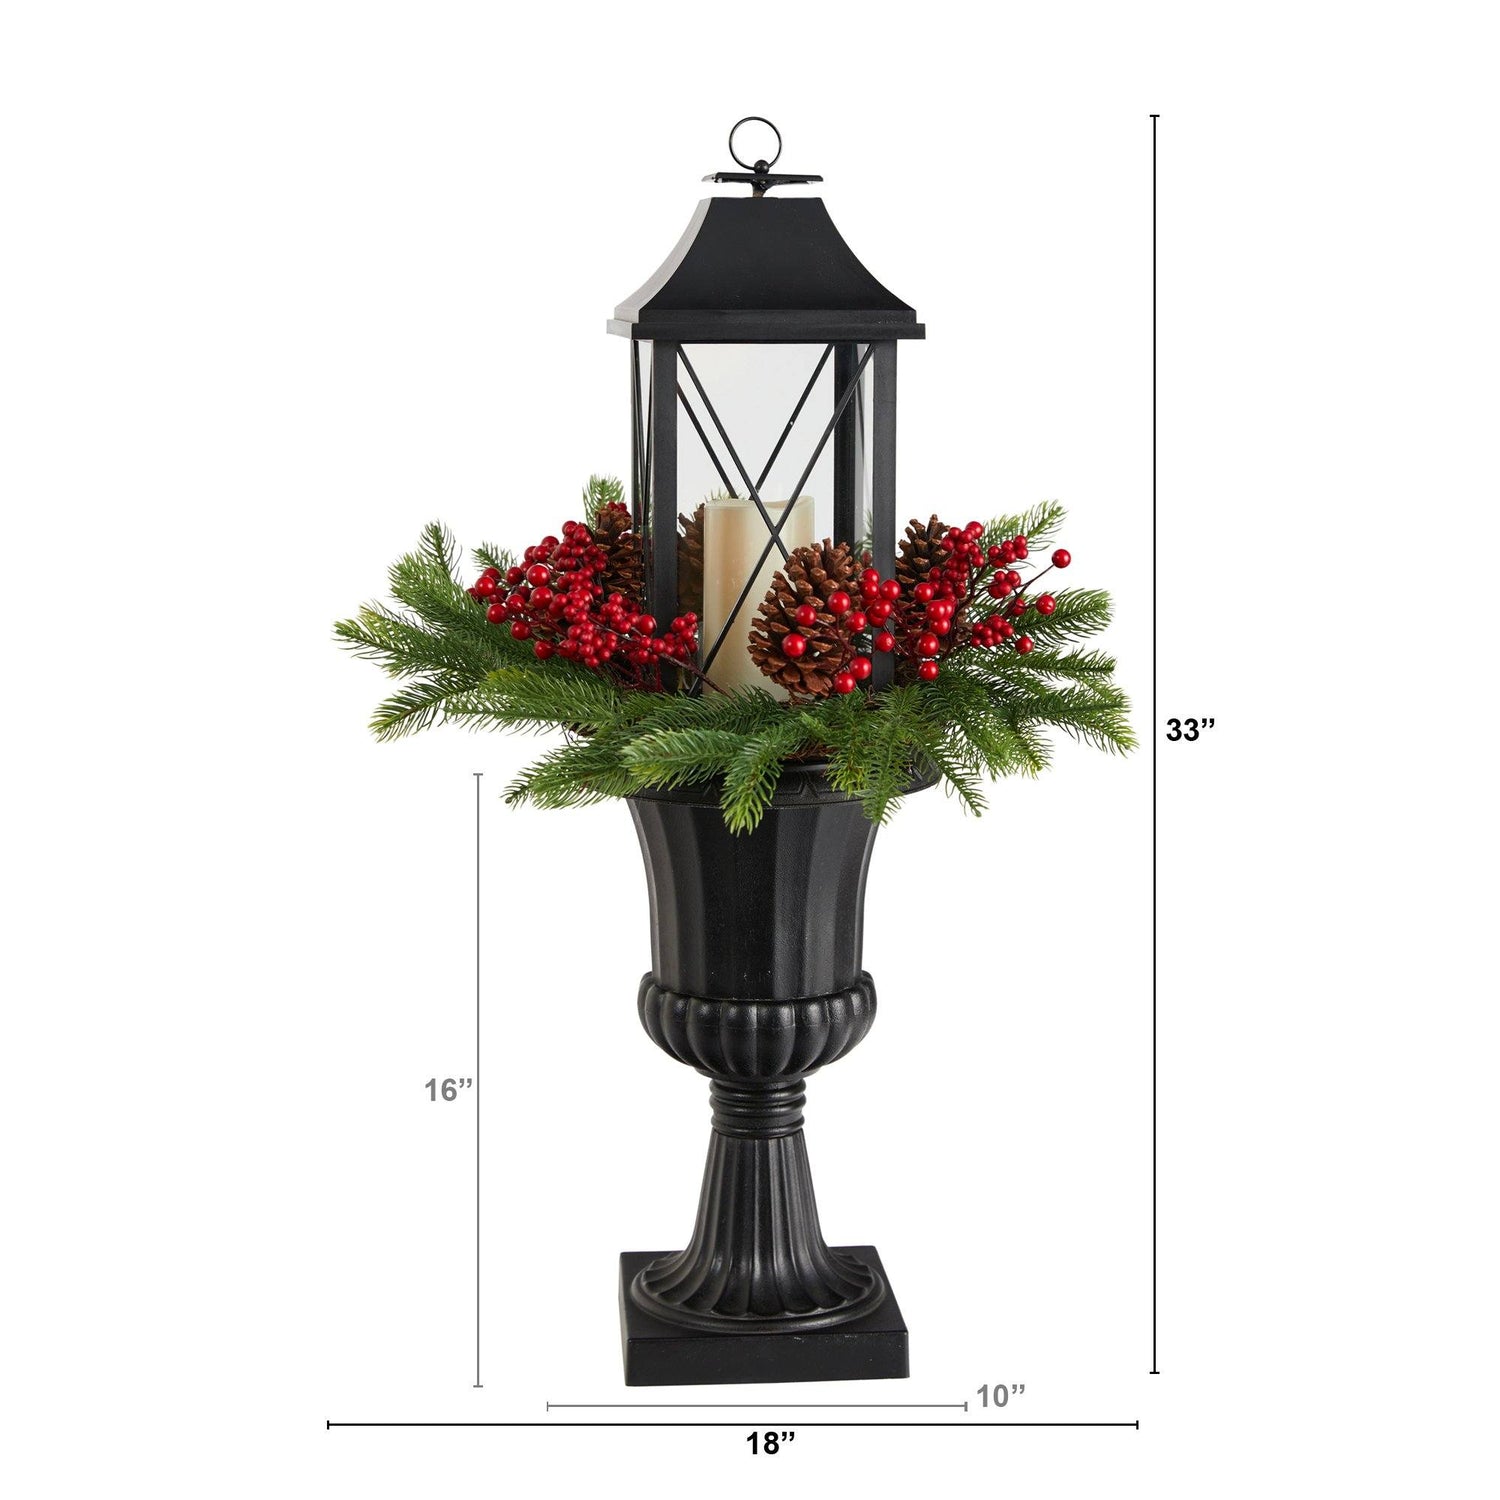 33” Holiday Greenery, Berries and Pinecones in Decorative Urn with Large Lantern